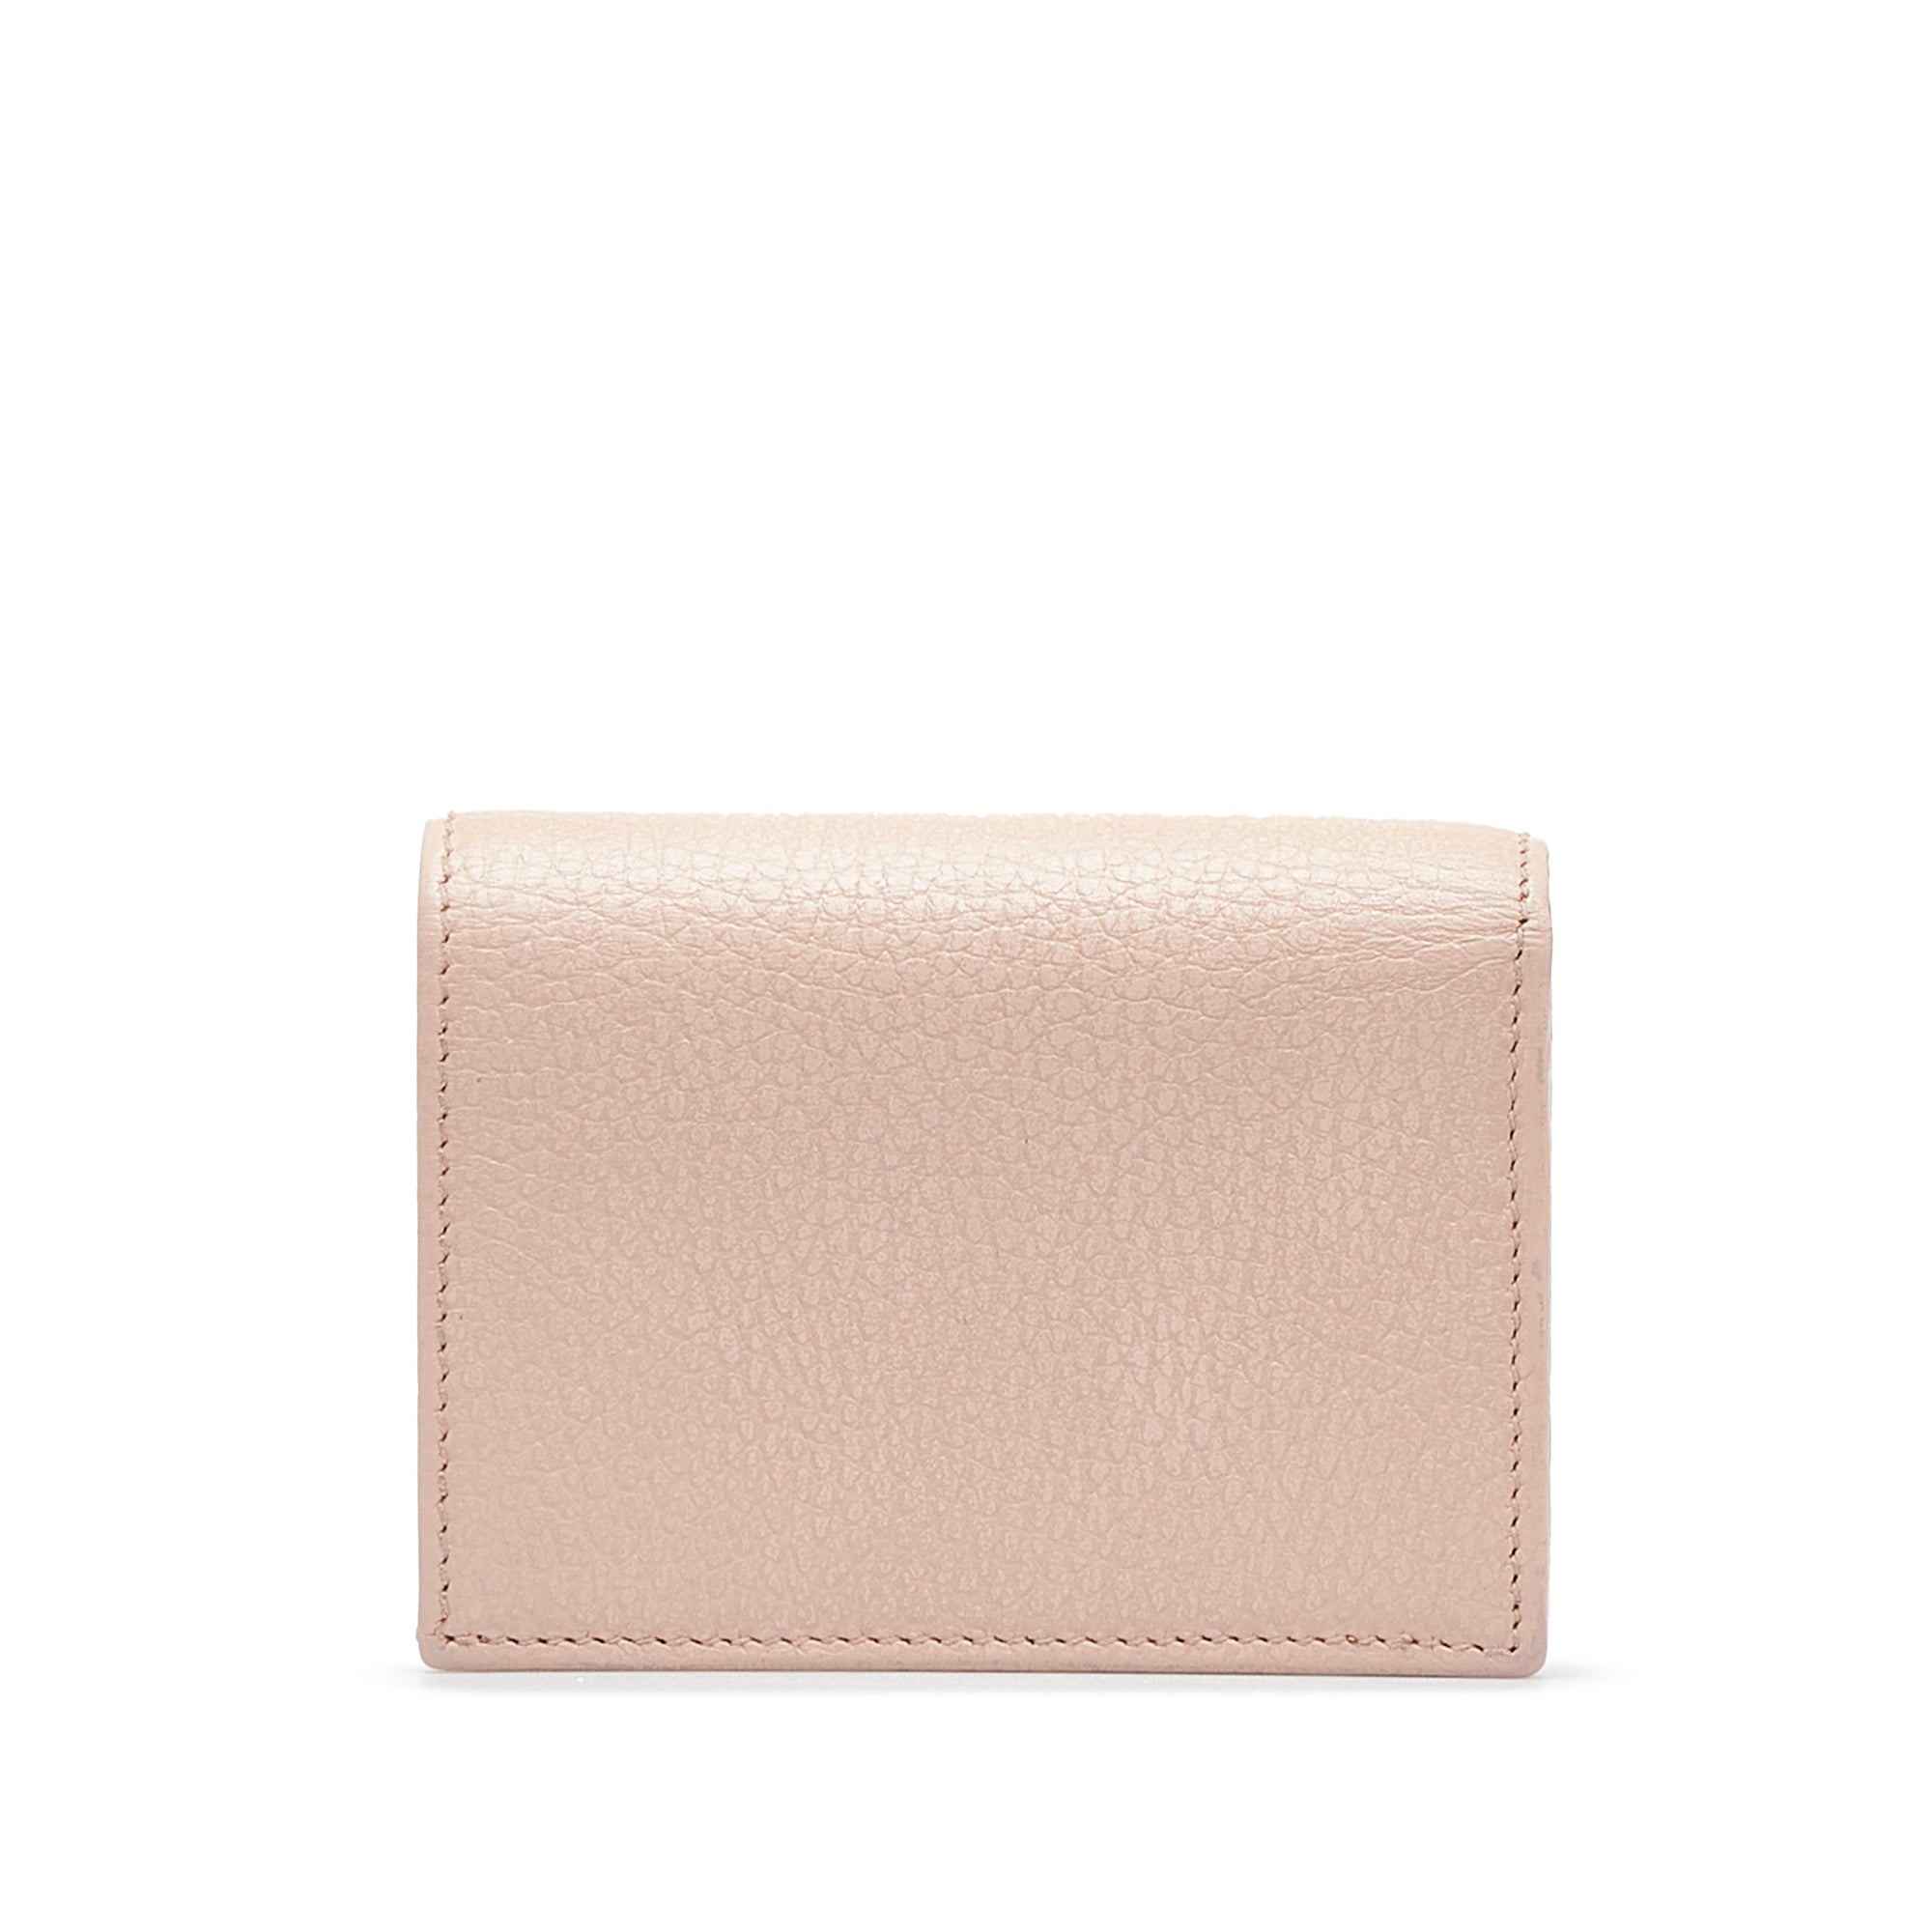 Gucci Leather Wallet Light Pink